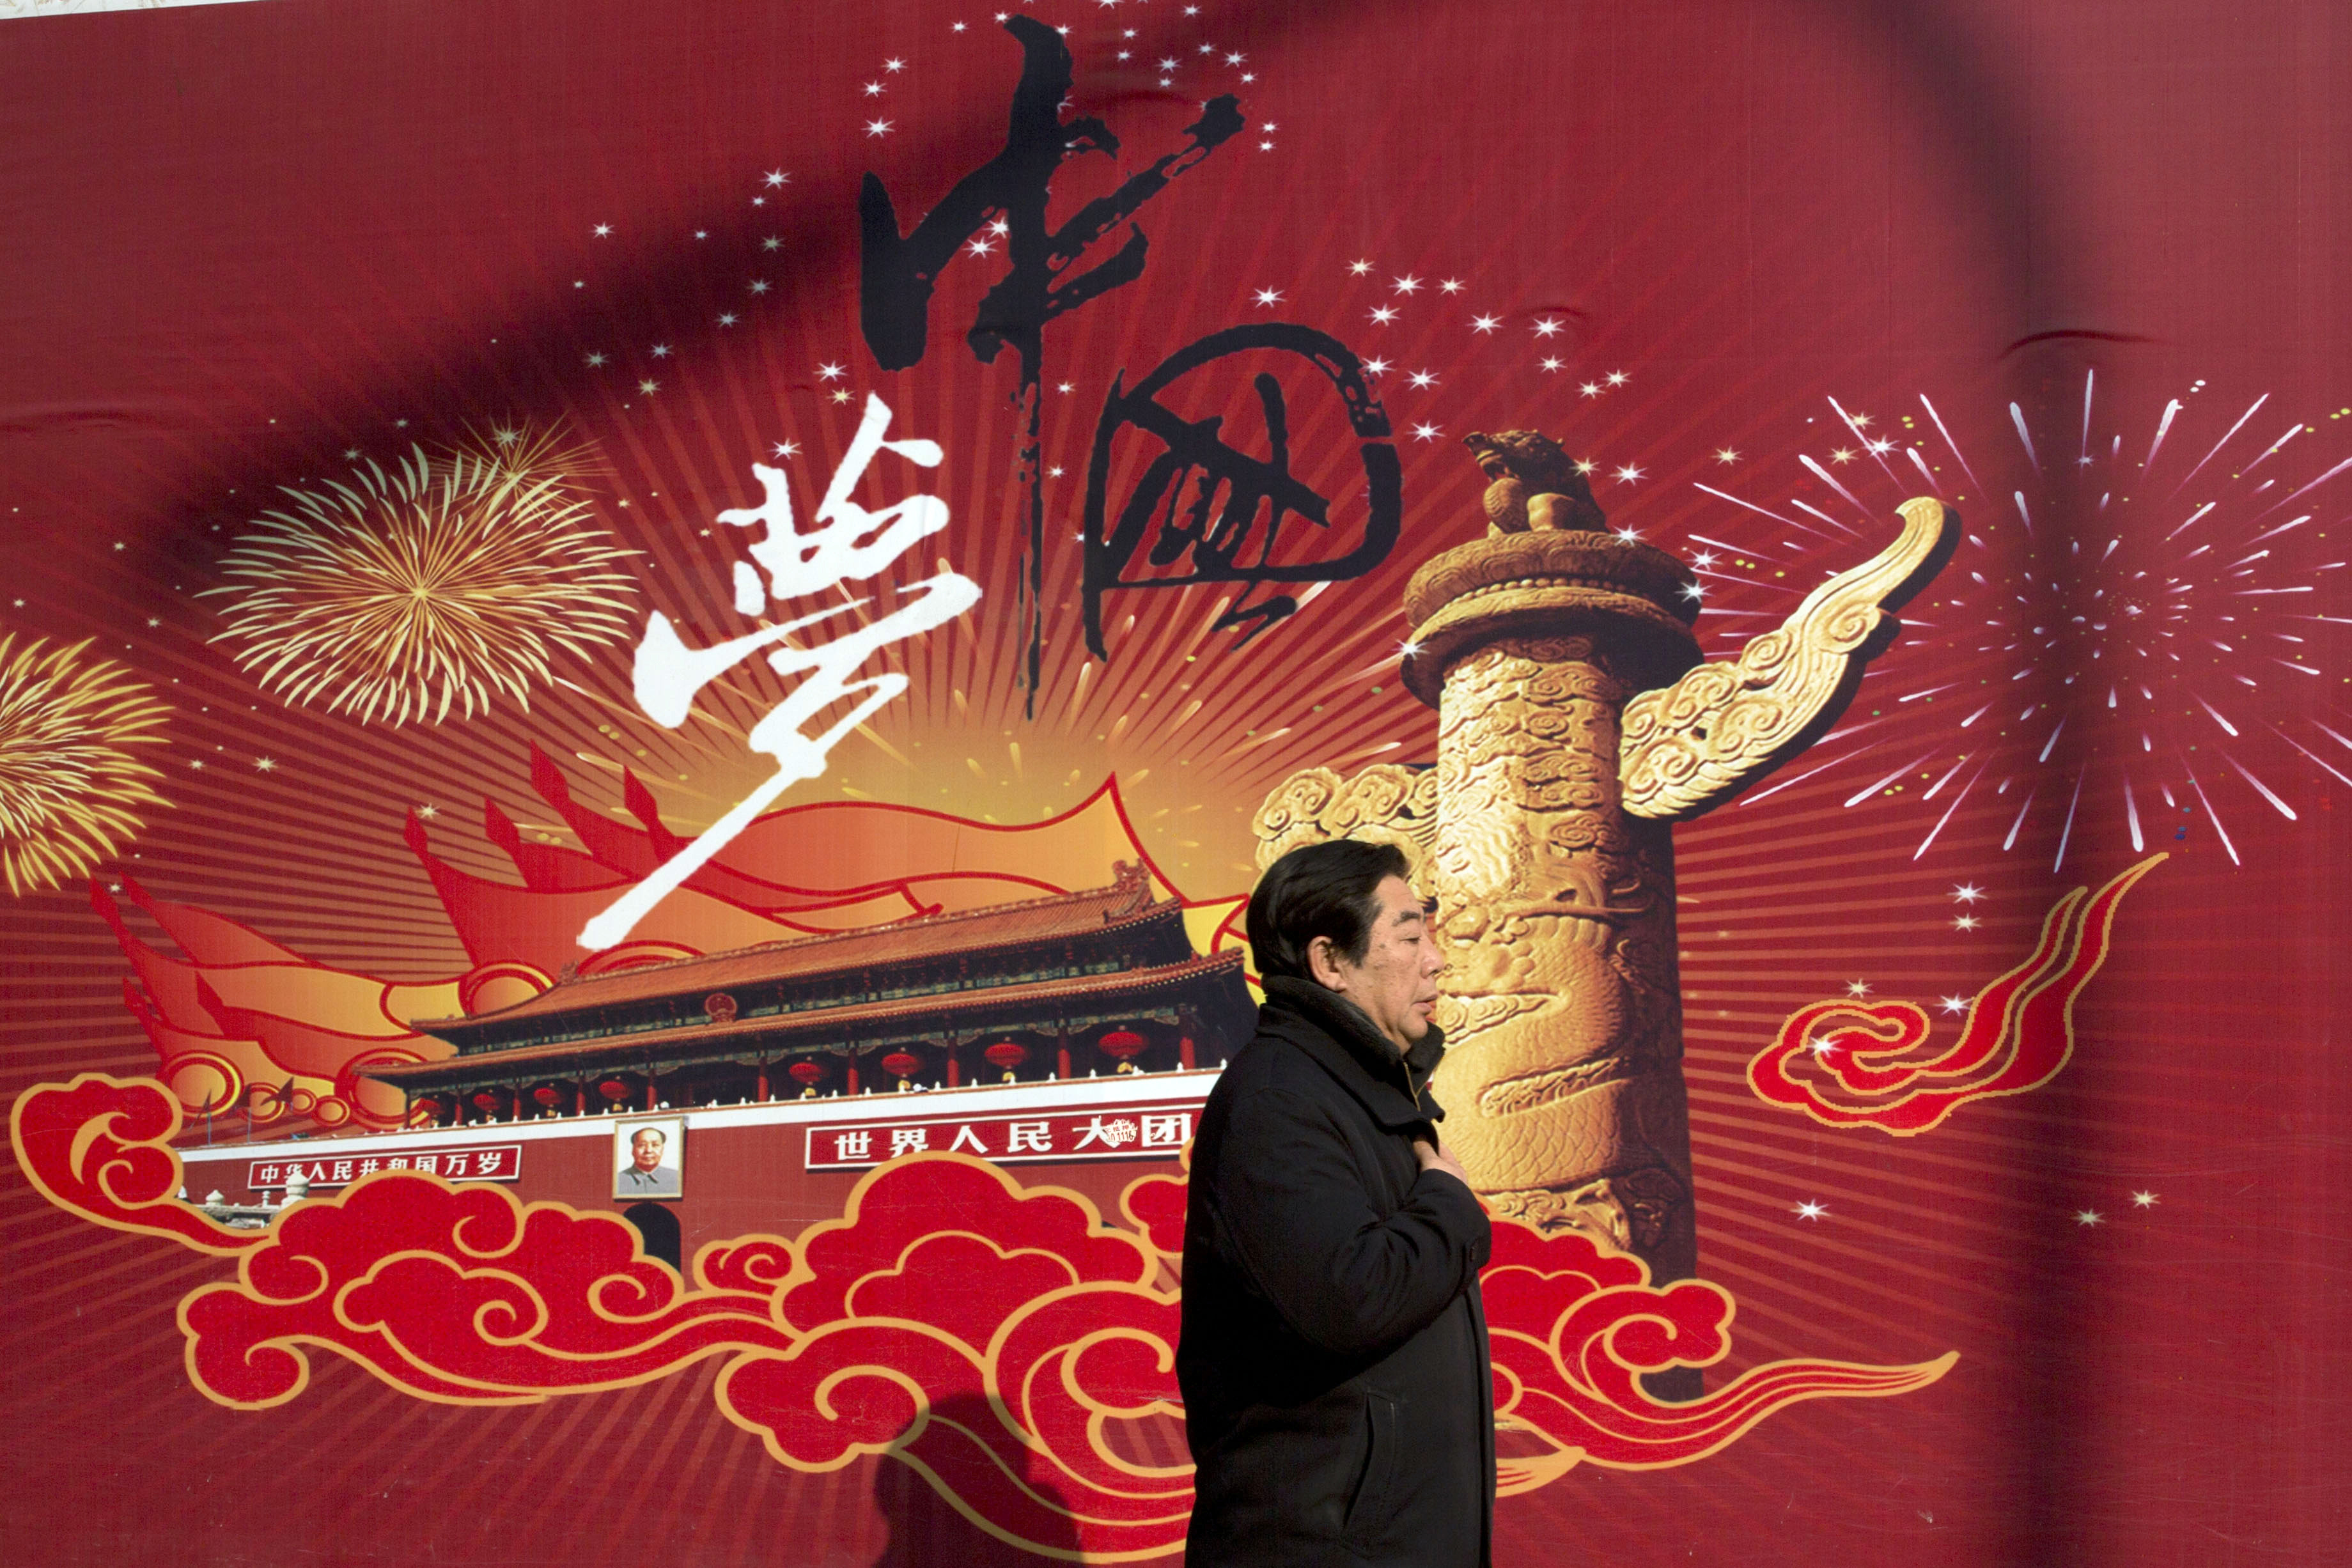 China's vision is encapsulated in the 'China Dream' - a strong and prosperous nation harking back to its glorious past as a great power. Photo: AP